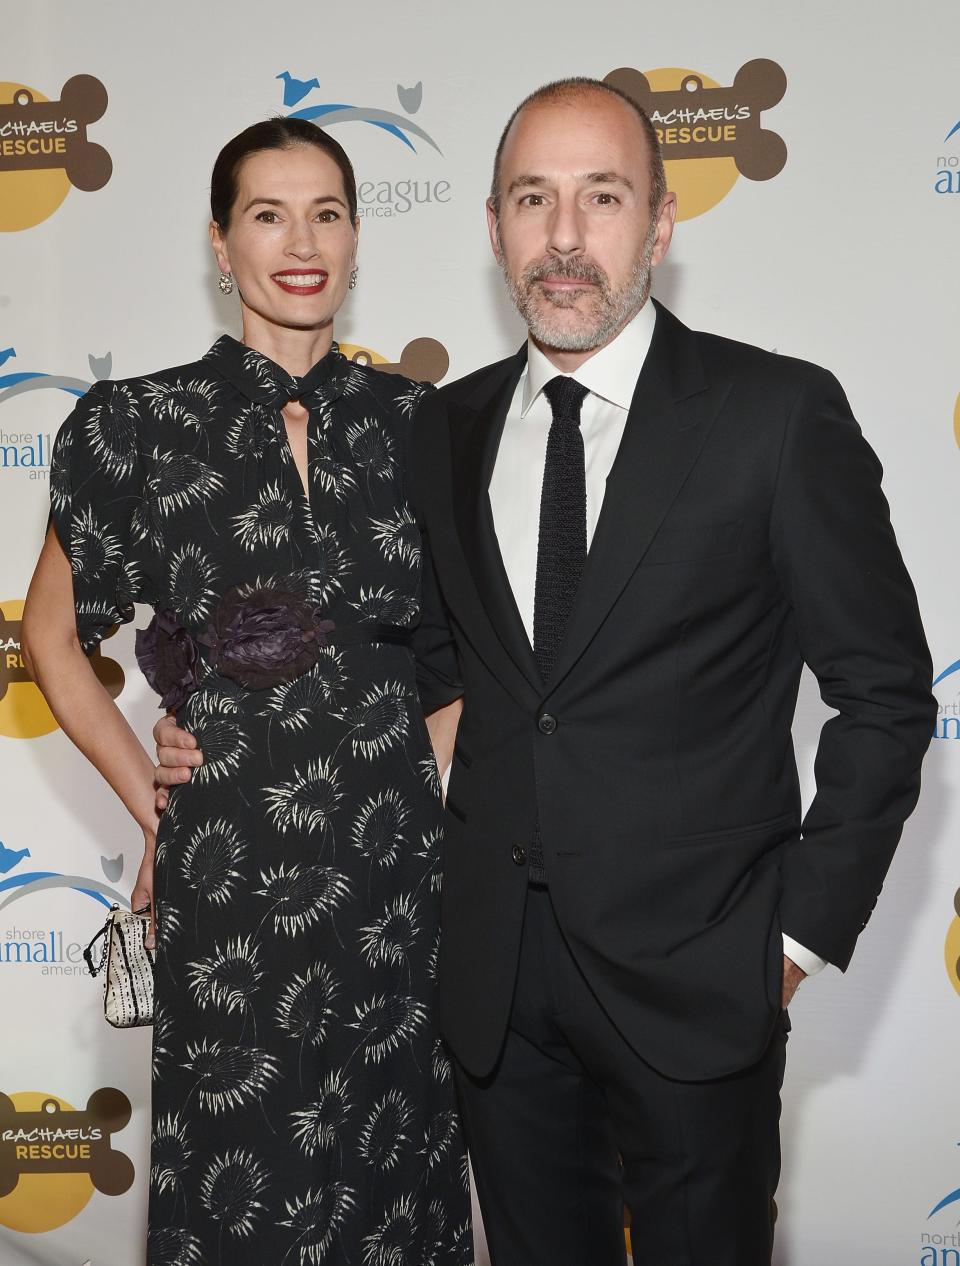 Annette Roque and Matt Lauer attend the 2013 Animal League America Celebrity gala at The Waldorf Astoria on Nov. 22, 2013 in New York City.